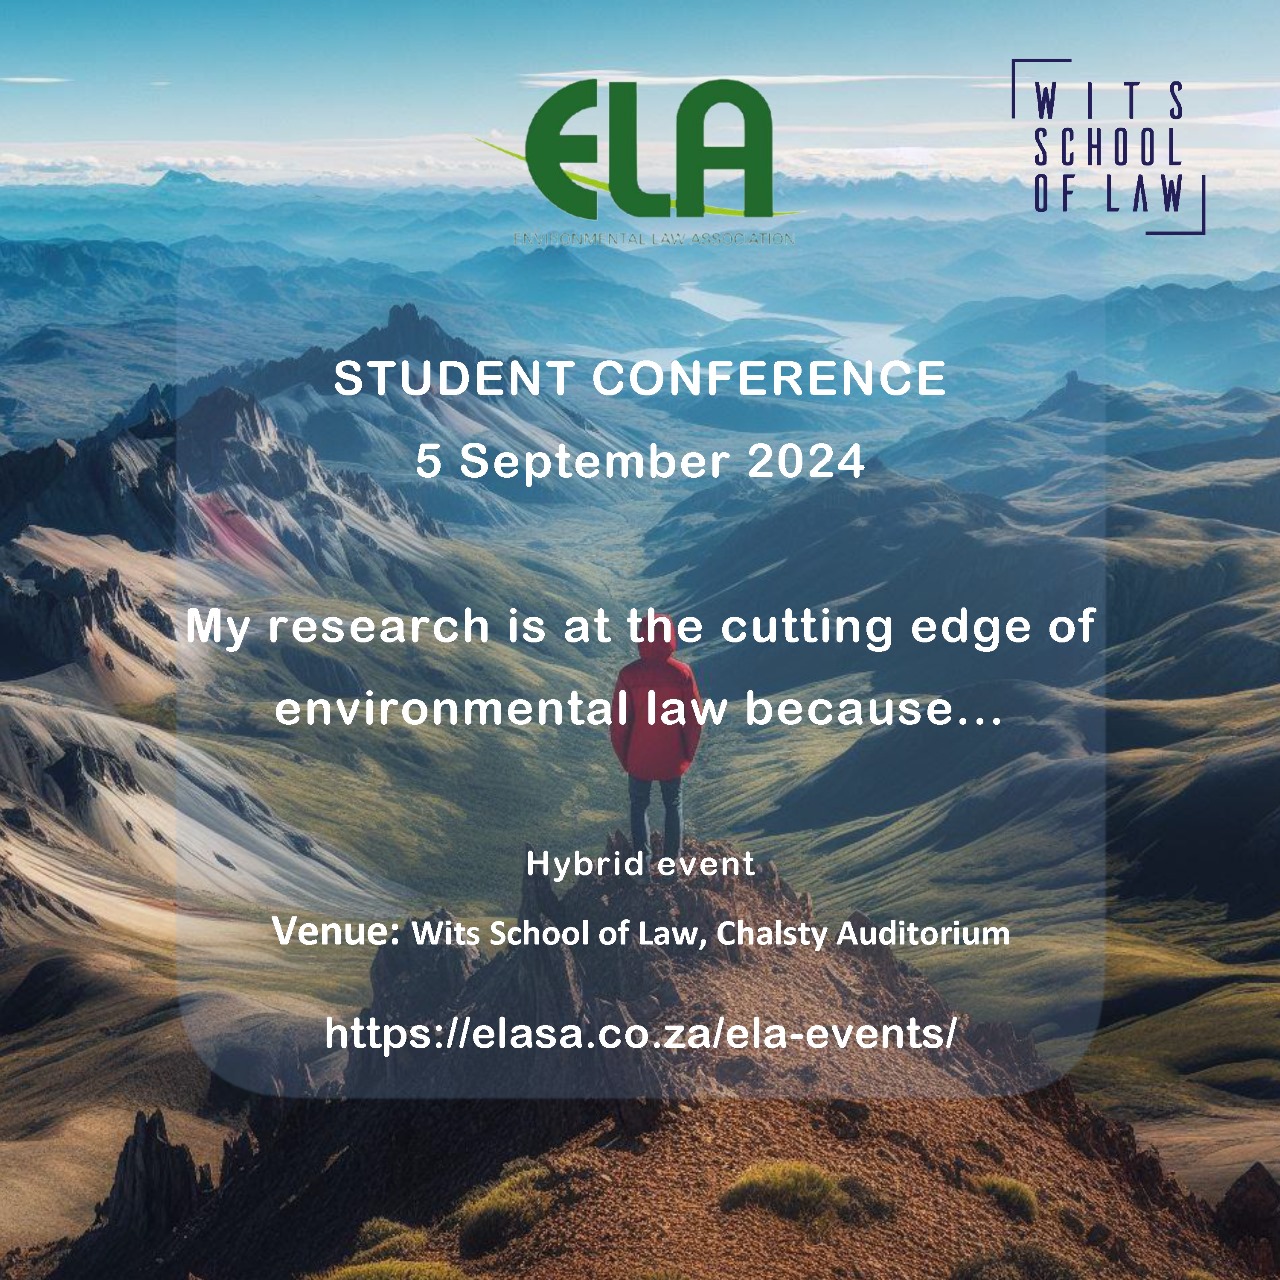 Student Conference 2024 - My research is at the cutting edge of environmental law because...